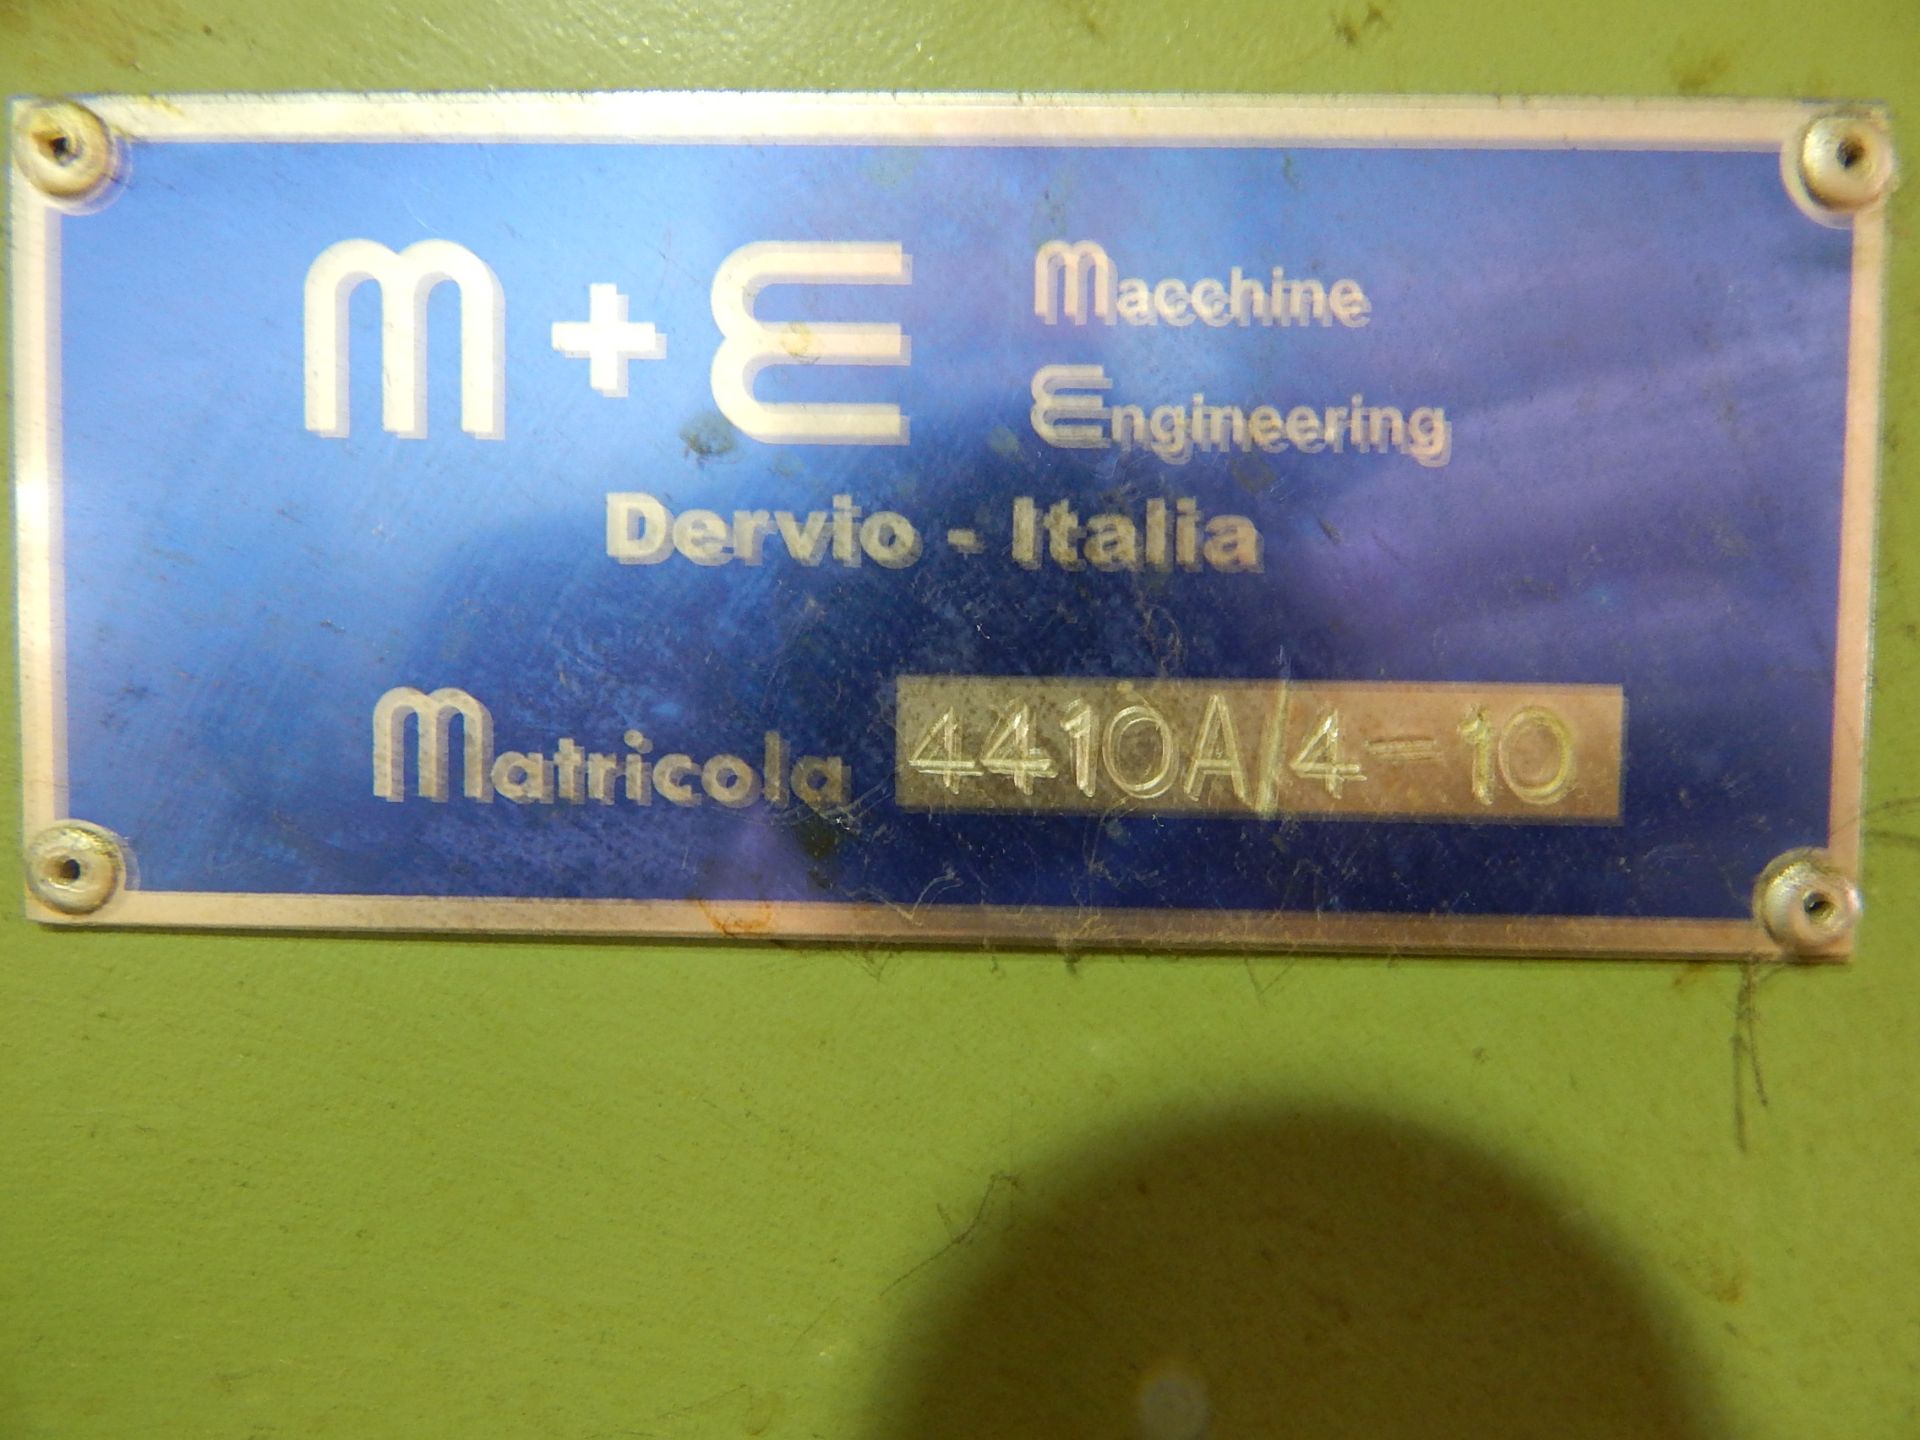 M & E Model NMG 25 Wet Wire Drawing Machine, SN 4410A-4-10 with Integrated Spooler Model, SP 330, - Image 6 of 6